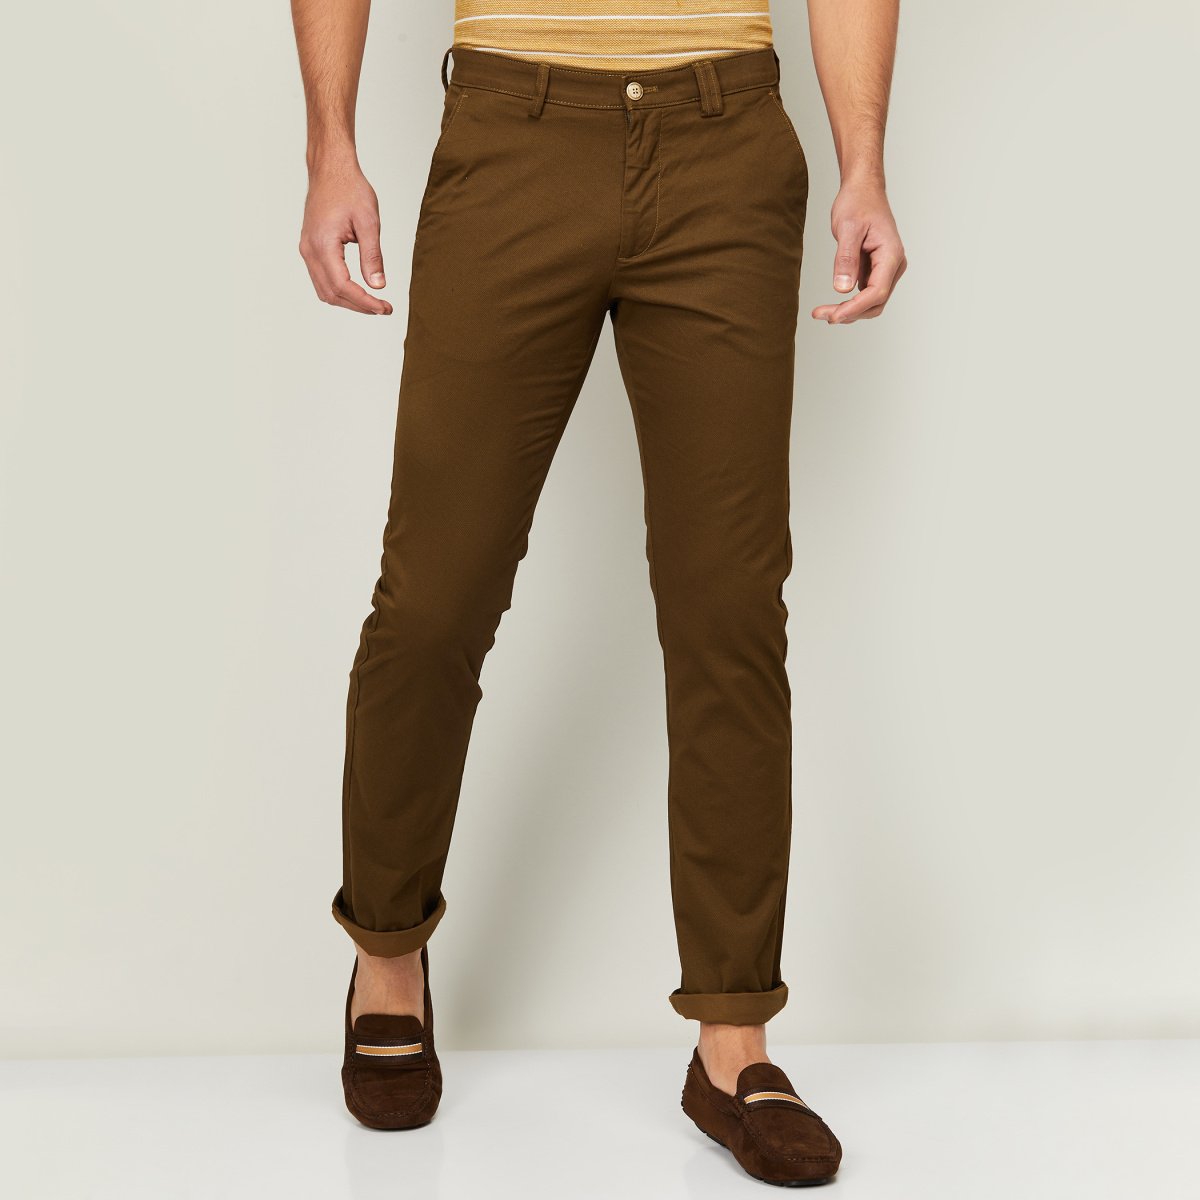 Solly Trousers & Leggings, Allen Solly Beige Casual Pants for Women at  Allensolly.com